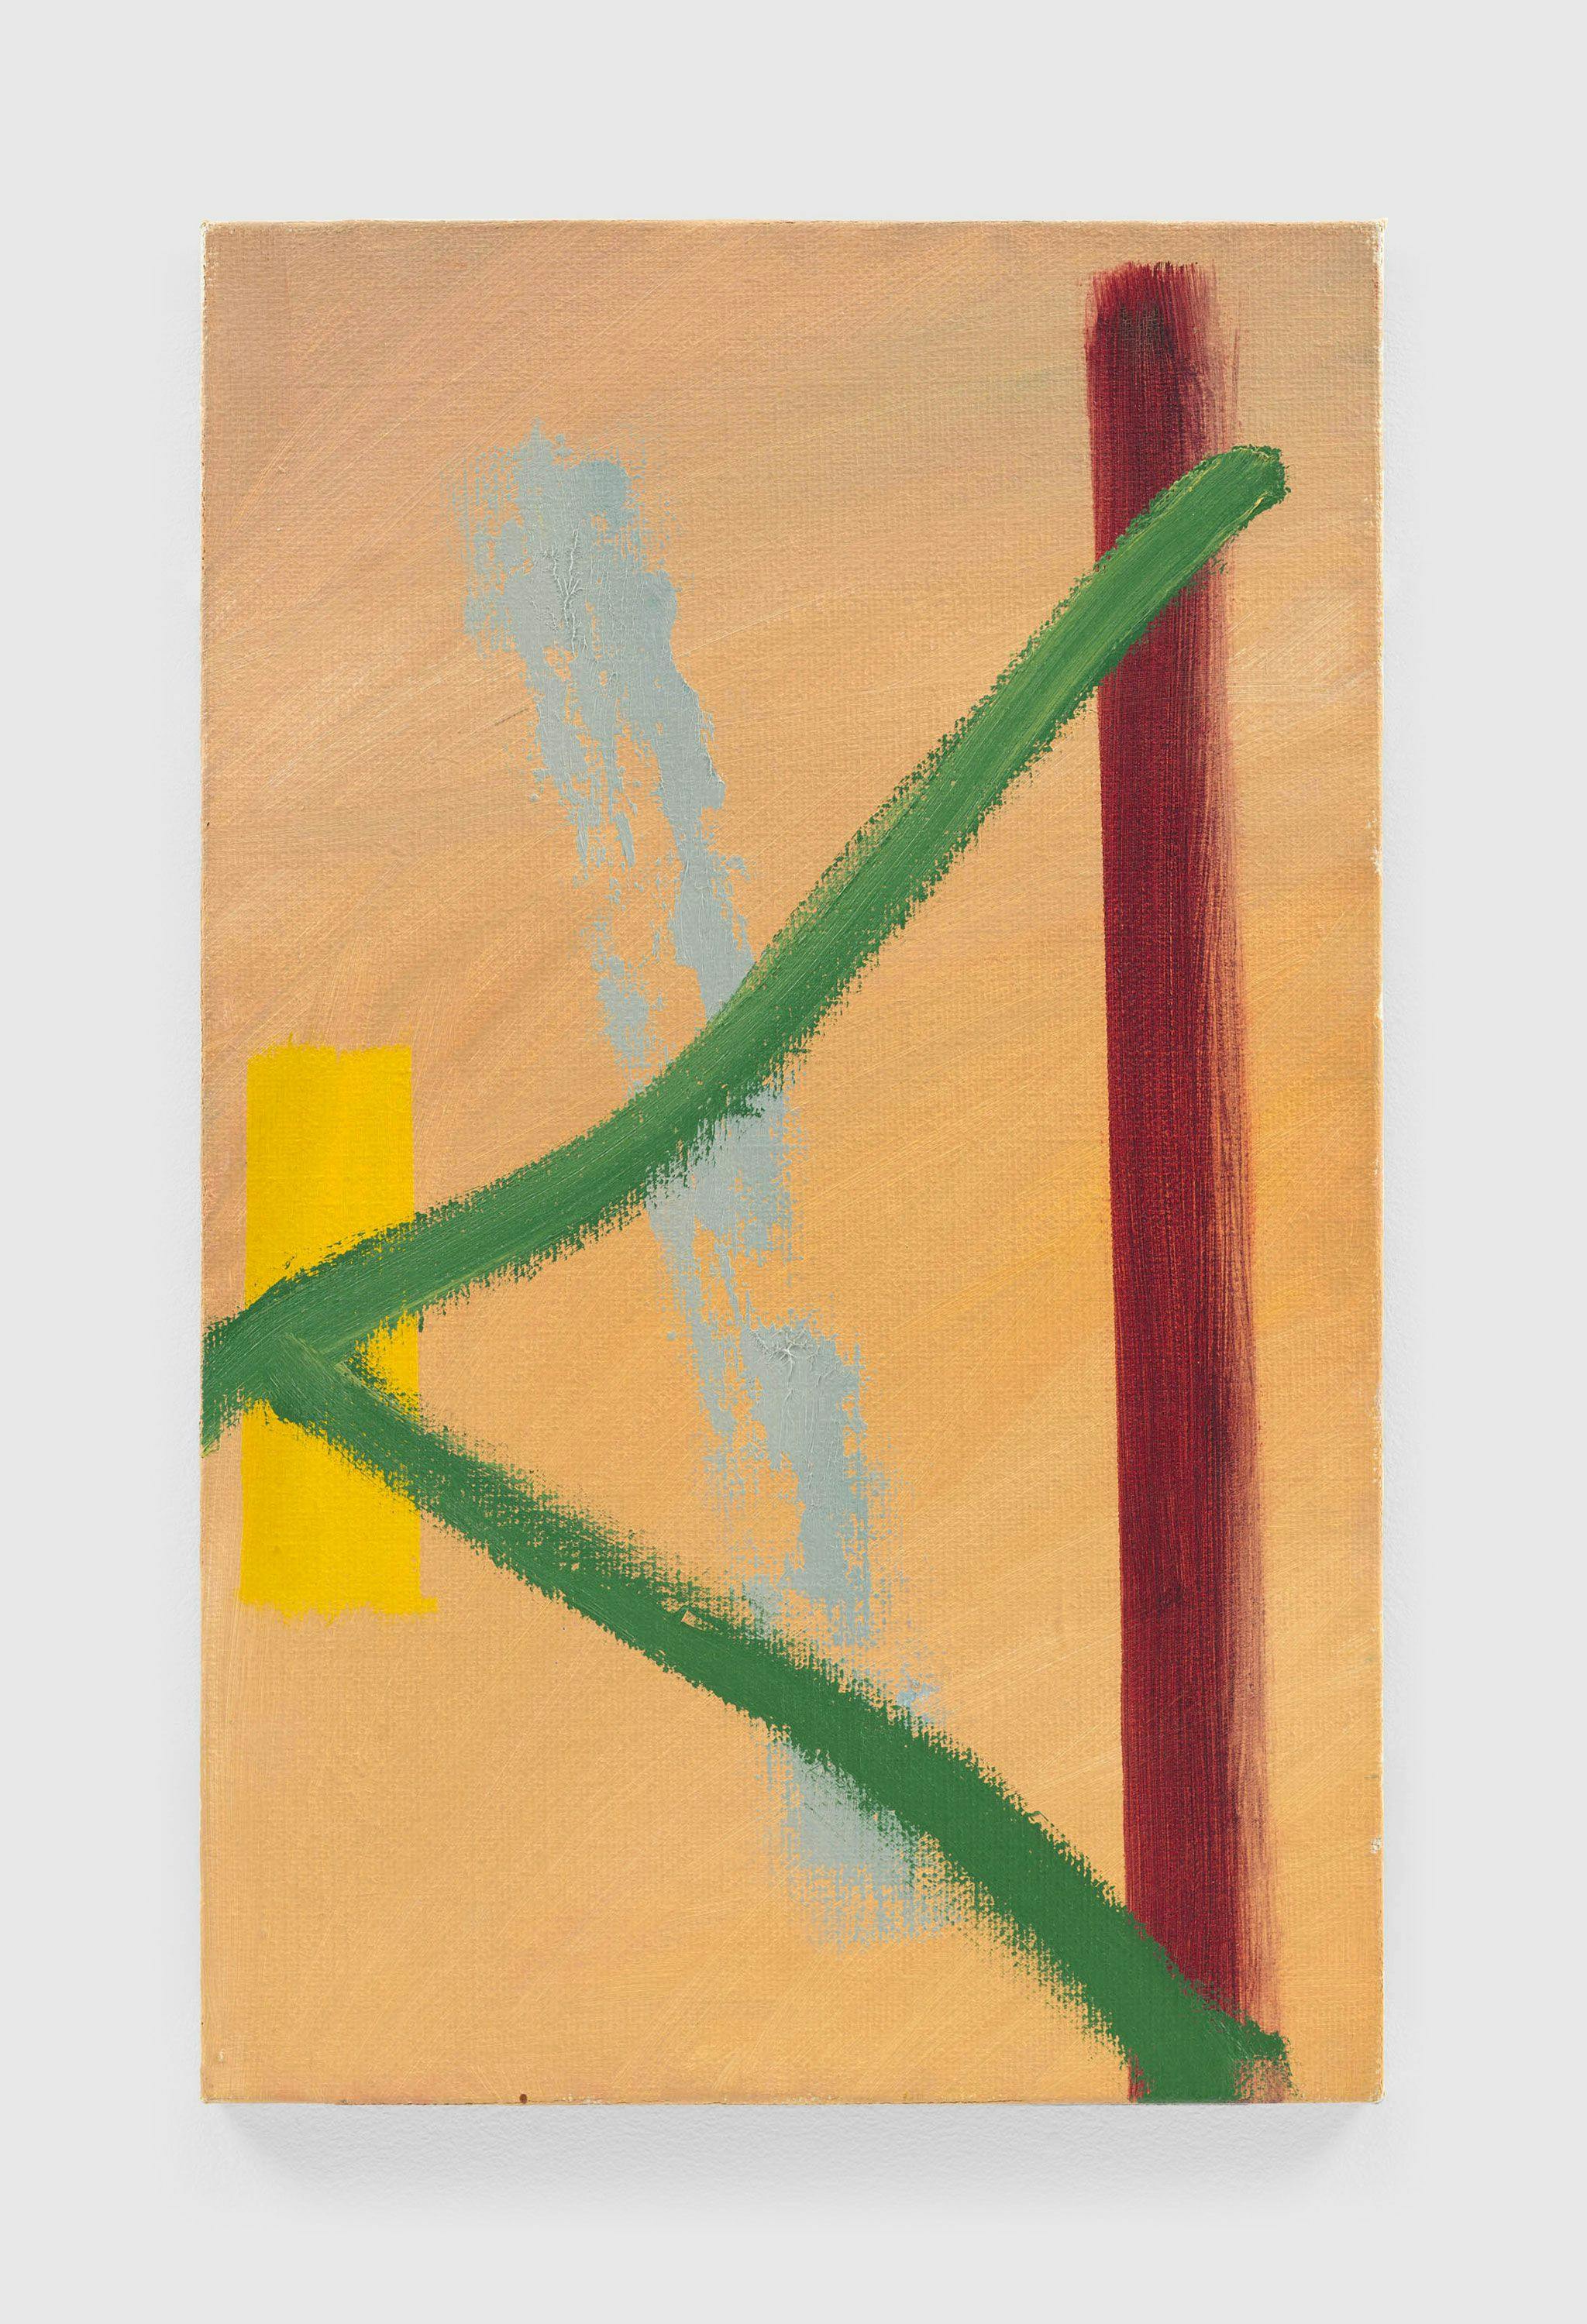 A painting by Raoul De Keyser, titled Streng, dated 1987.